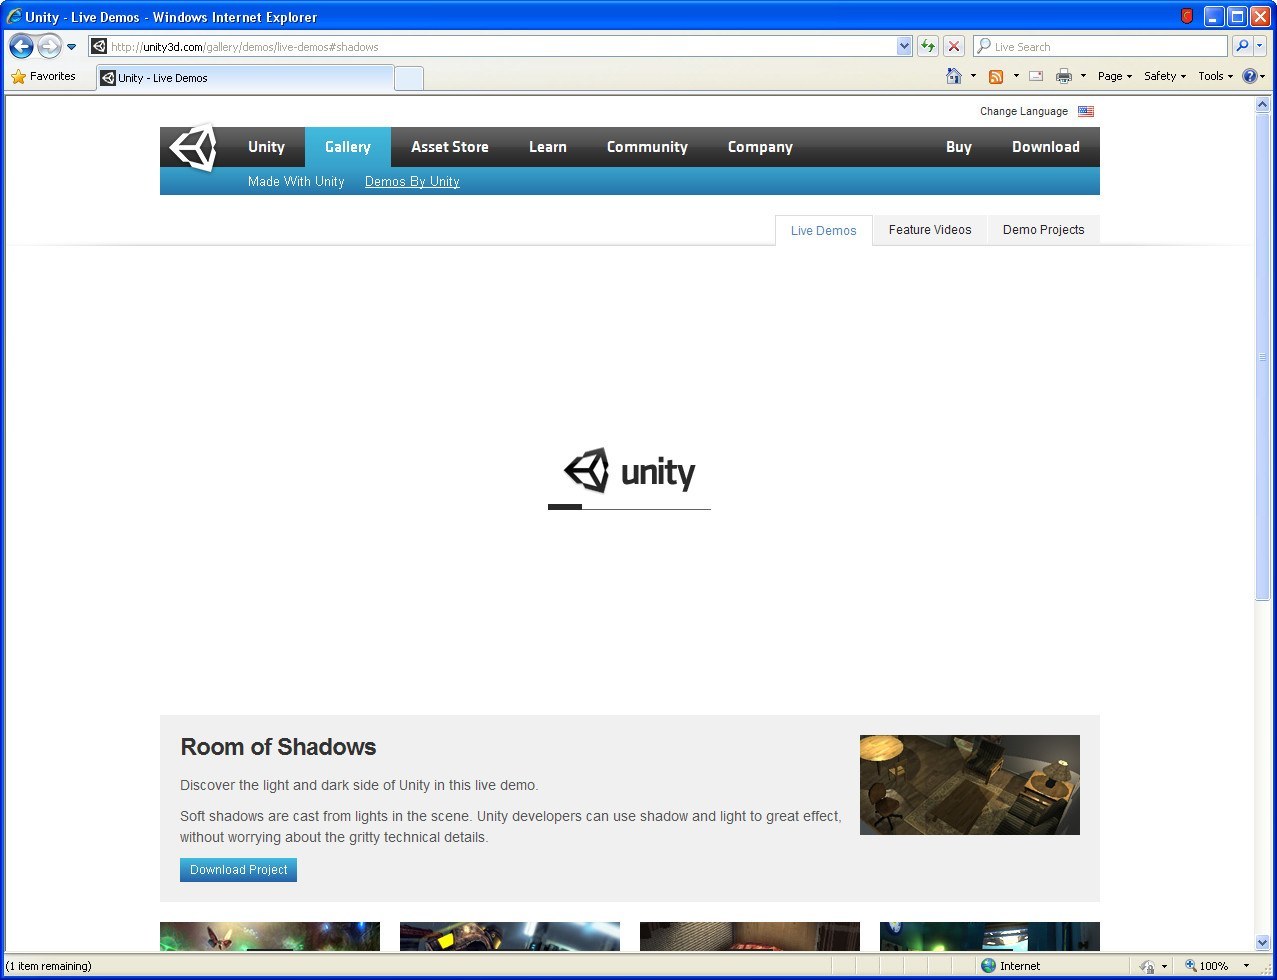 browsers that support unity web player 2017